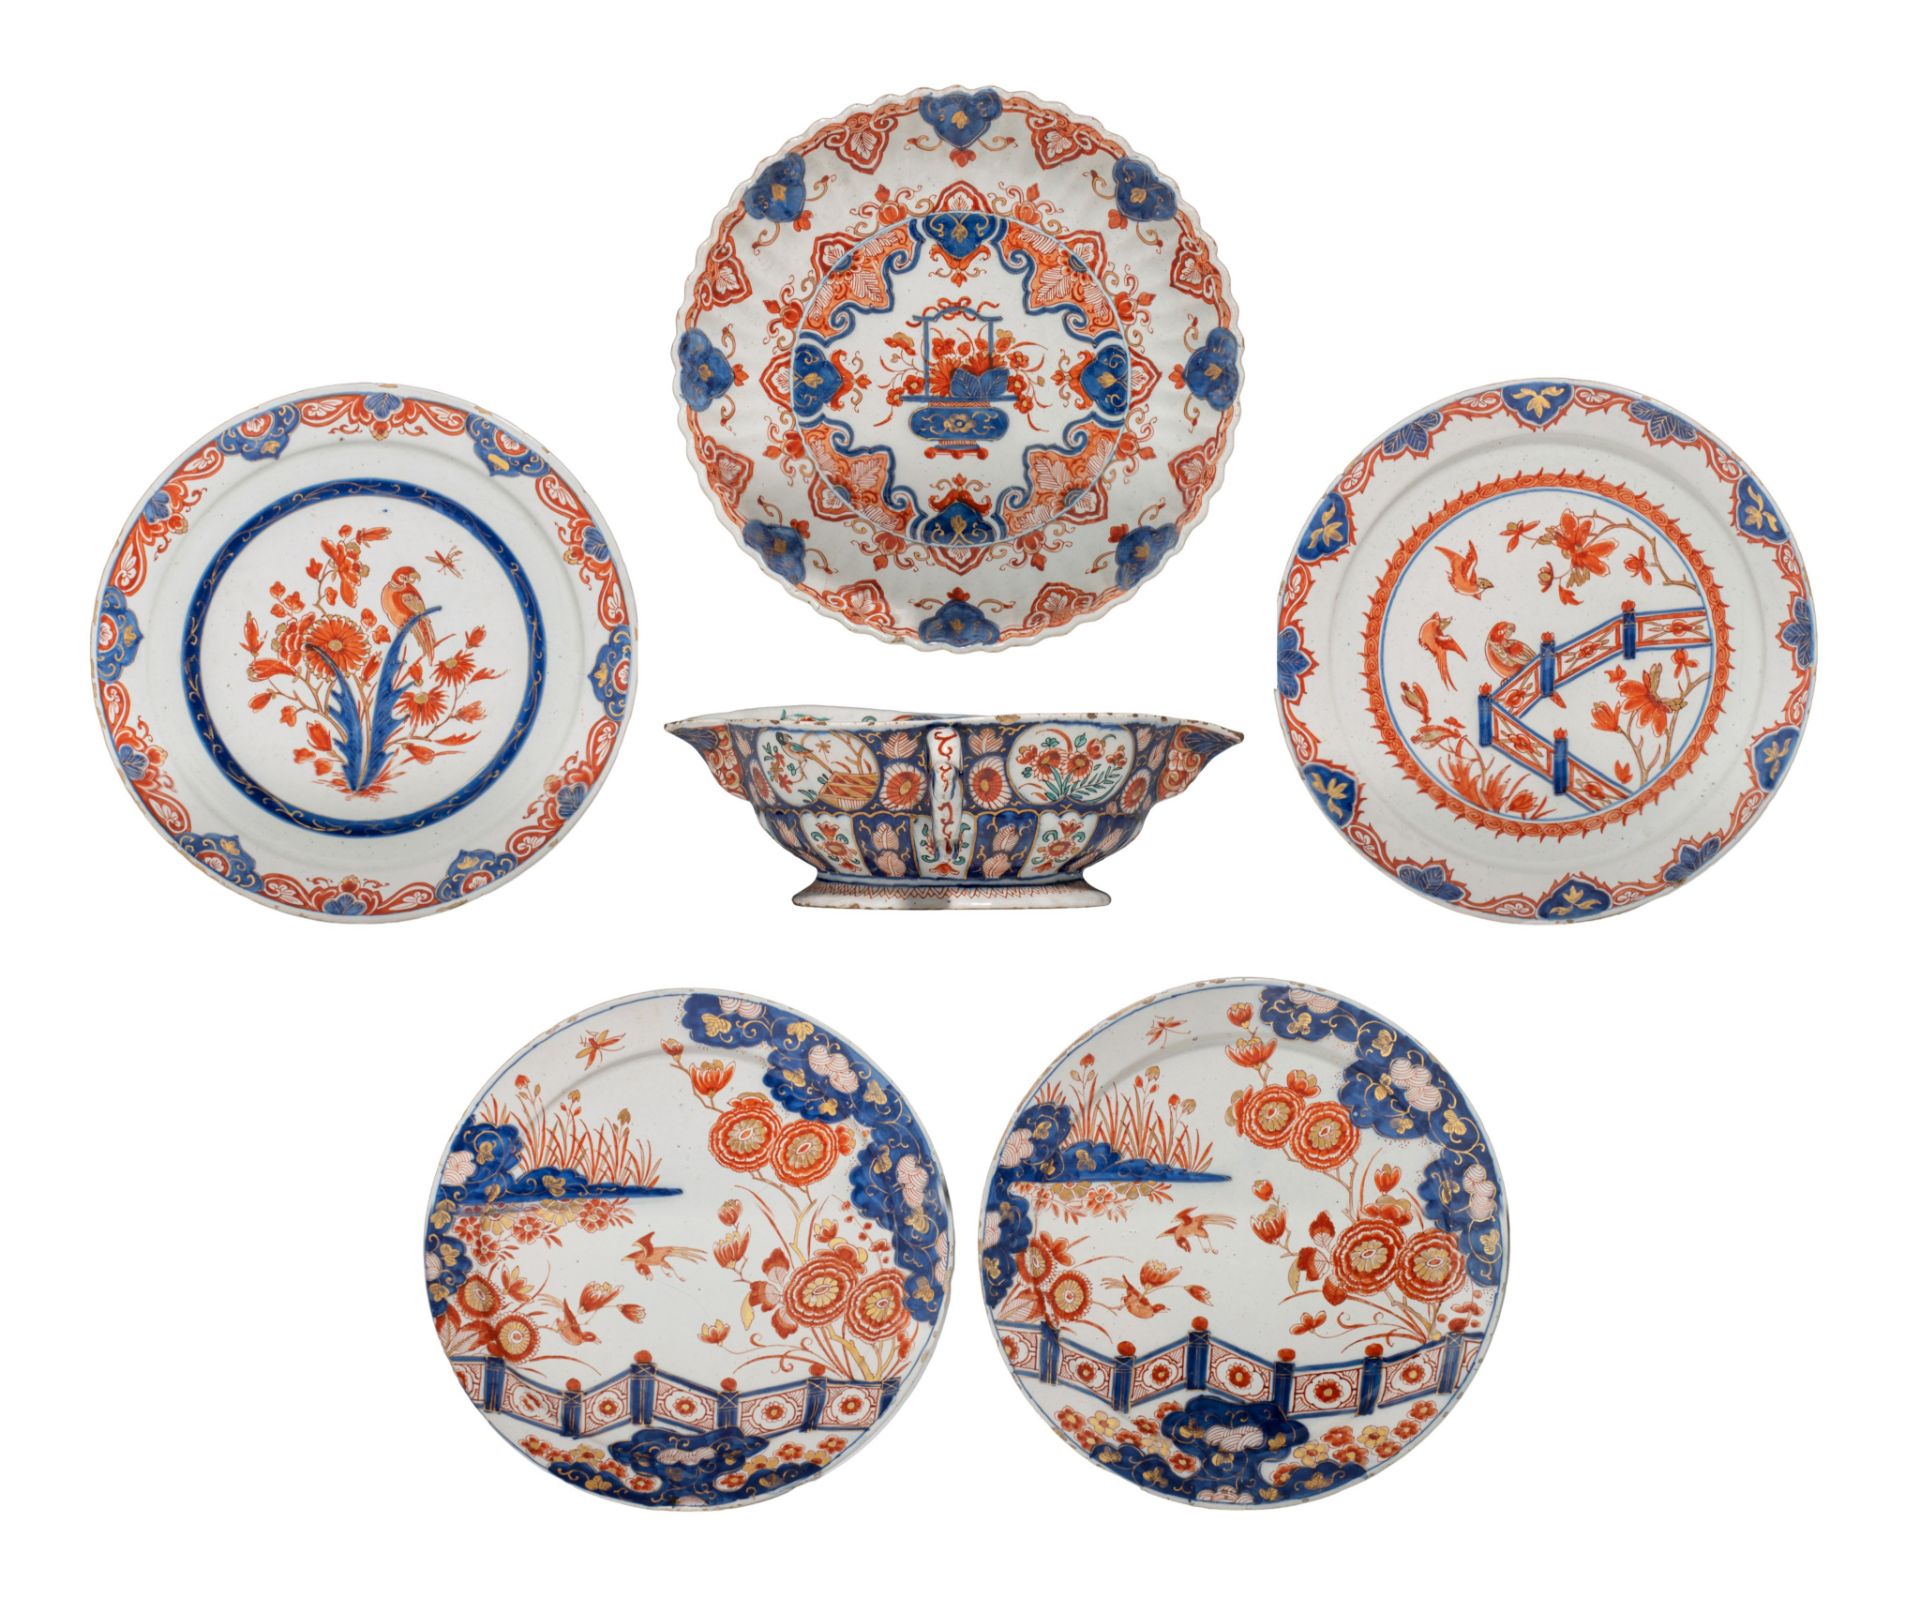 A various collection of 17th/18thC Dutch Delft Imari-style plates and a saucer, ø 22 / H 6 cm